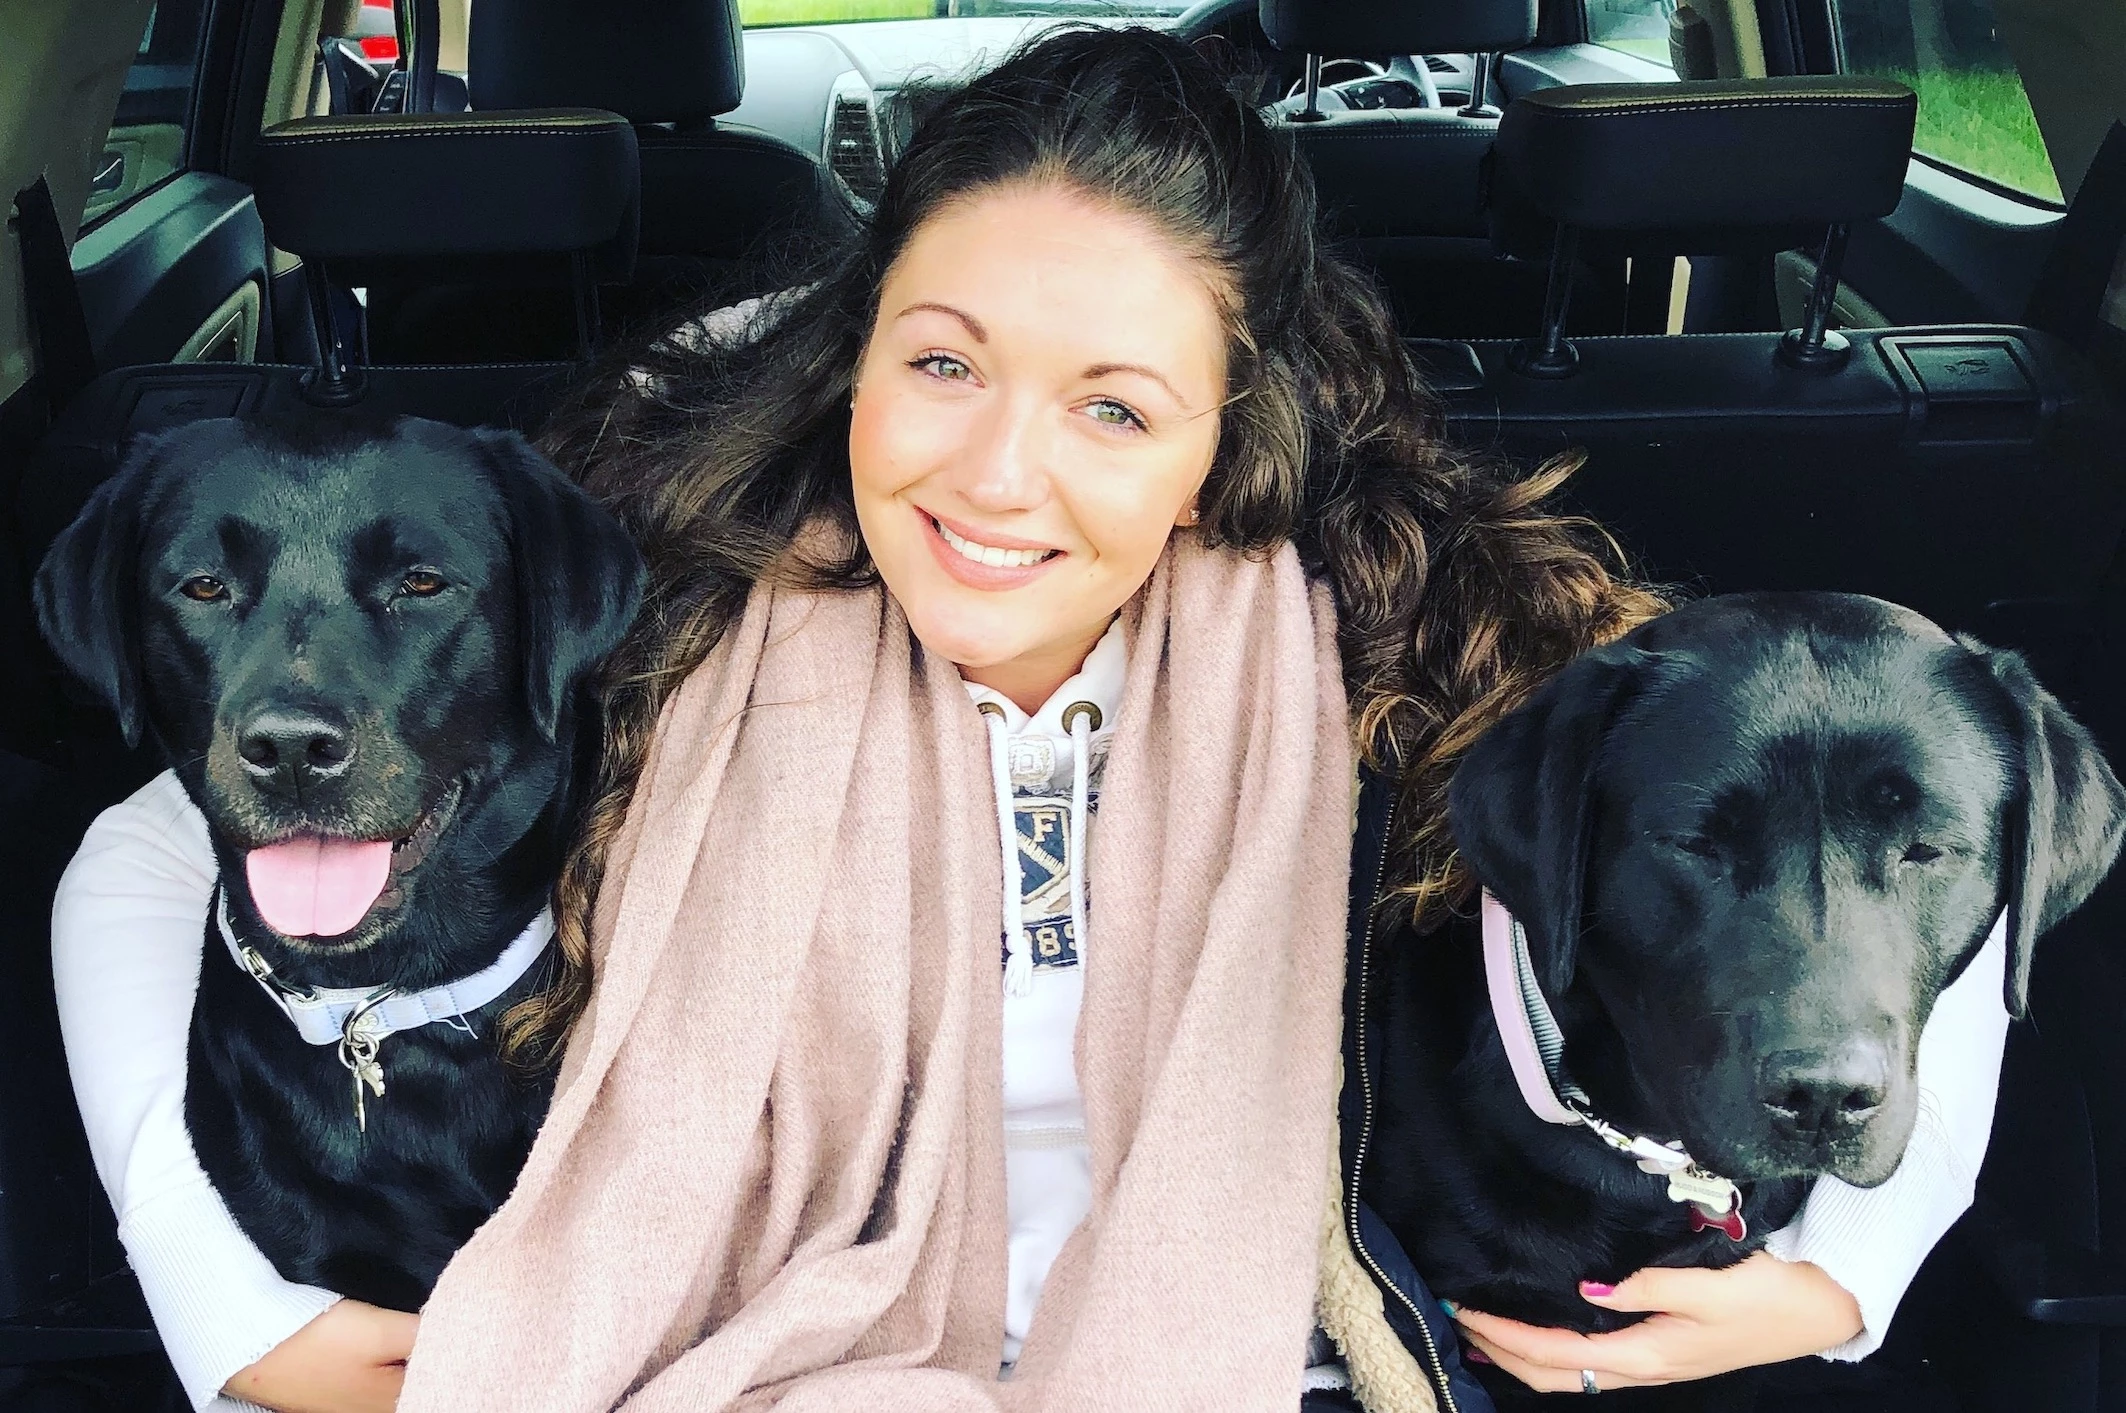 Founder of Olive & Berry, Natalie Tyson, with her two black labradors who inspired the business